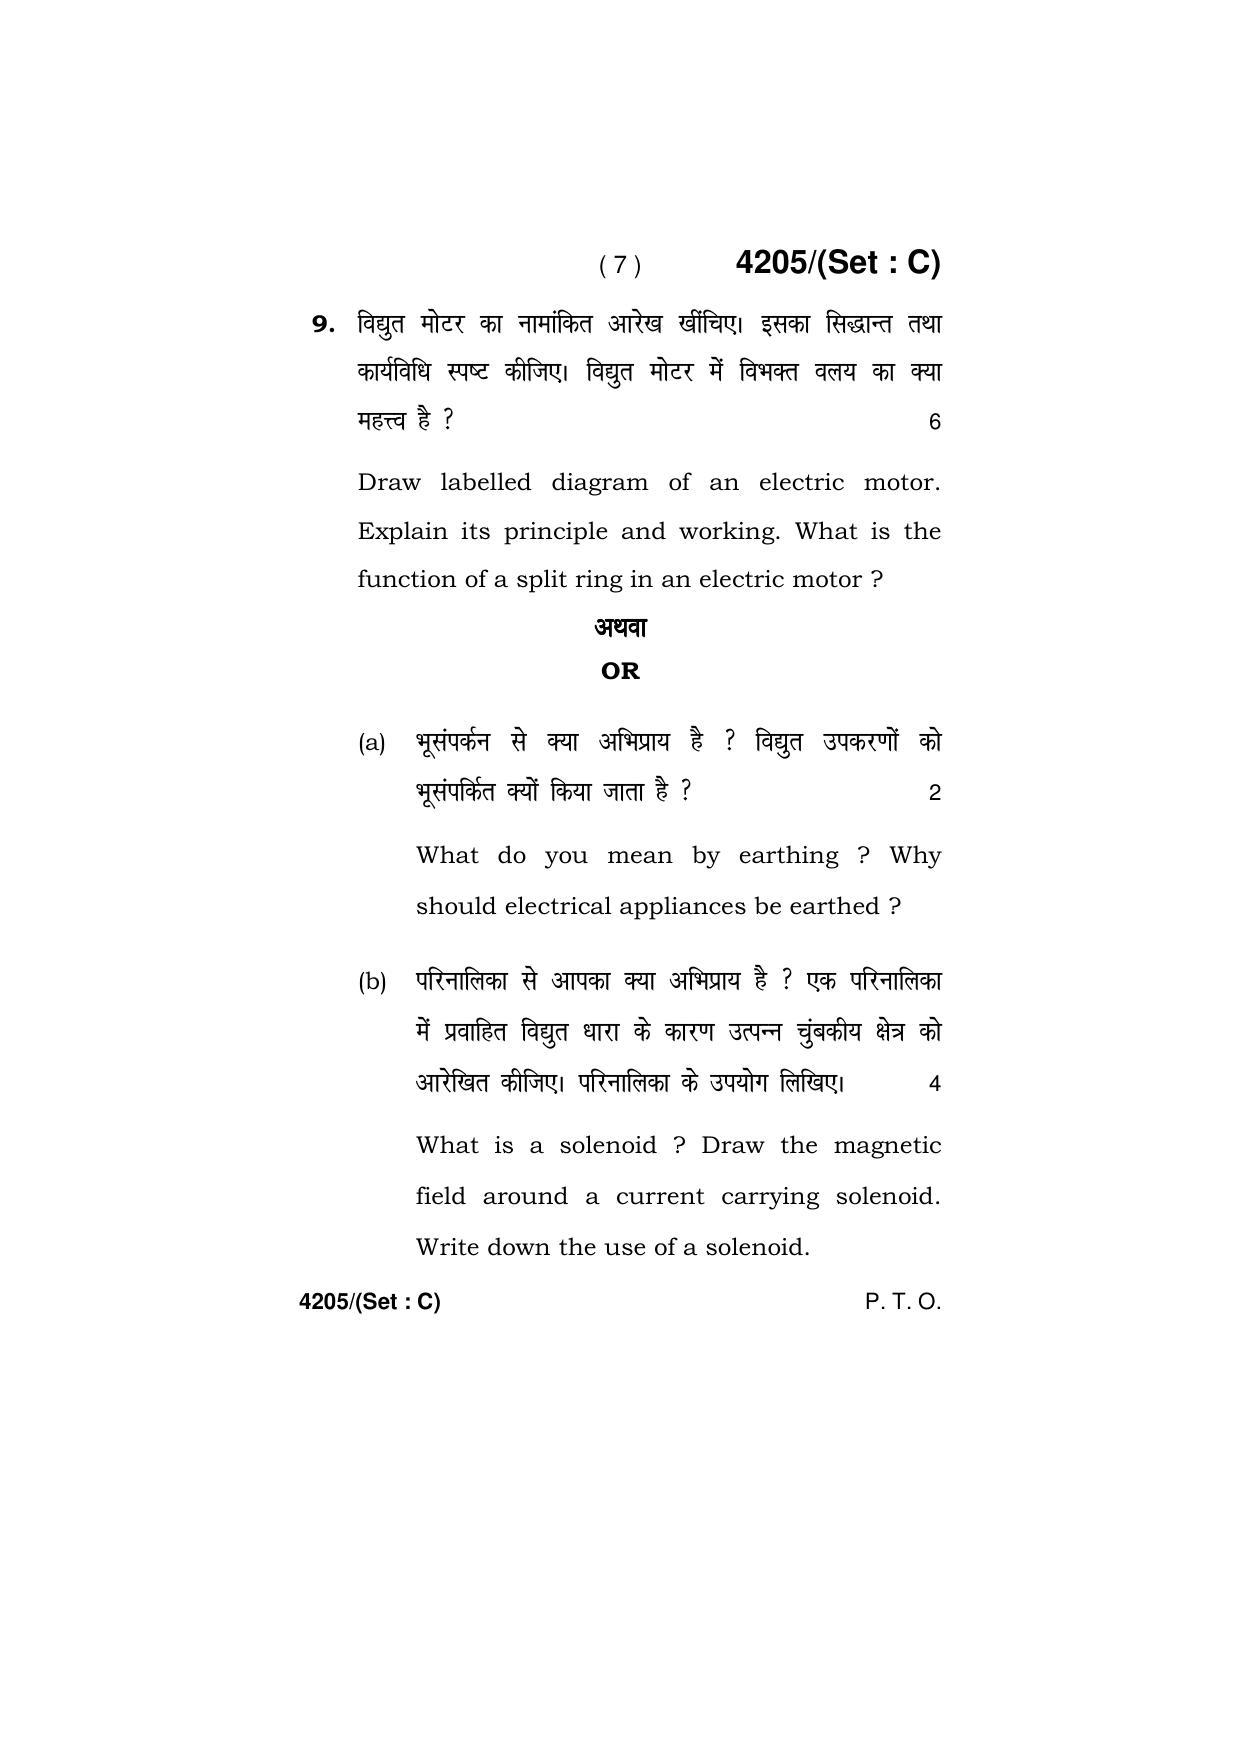 Haryana Board HBSE Class 10 Science (All Set) 2019 Question Paper - Page 39